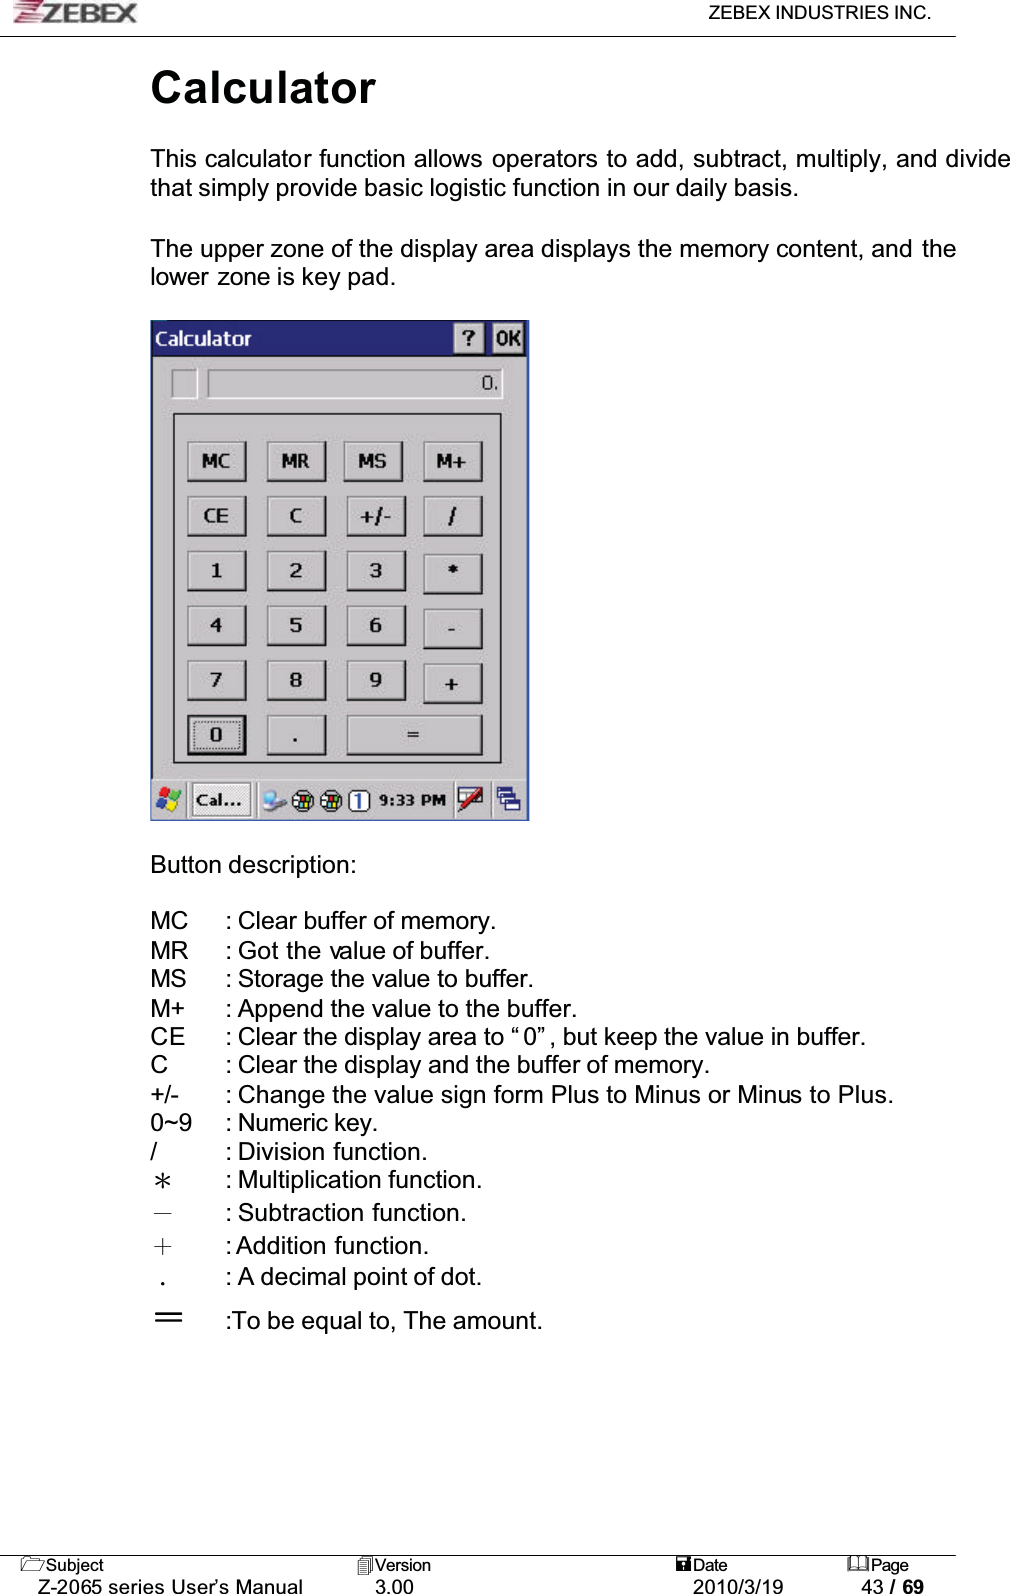 ZEBEX INDUSTRIES INC. Subject Version Date PageZ-2065 series User’s Manual 3.00 2010/3/19 43 / 69CalculatorThis calculator function allows operators to add, subtract, multiply, and divide that simply provide basic logistic function in our daily basis.!The upper zone of the display area displays the memory content, and thelower zone is key pad.Button description:MC : Clear buffer of memory.MR : Got the value of buffer.MS : Storage the value to buffer.M+ : Append the value to the buffer.CE : Clear the display area to “ 0” , but keep the value in buffer.C : Clear the display and the buffer of memory.+/- : Change the value sign form Plus to Minus or Minus to Plus.0~9 : Numeric key./ : Division function.Ϡ: Multiplication function.Ё: Subtraction function.Ѐ: Addition function.΢: A decimal point of dot.:To be equal to, The amount. 